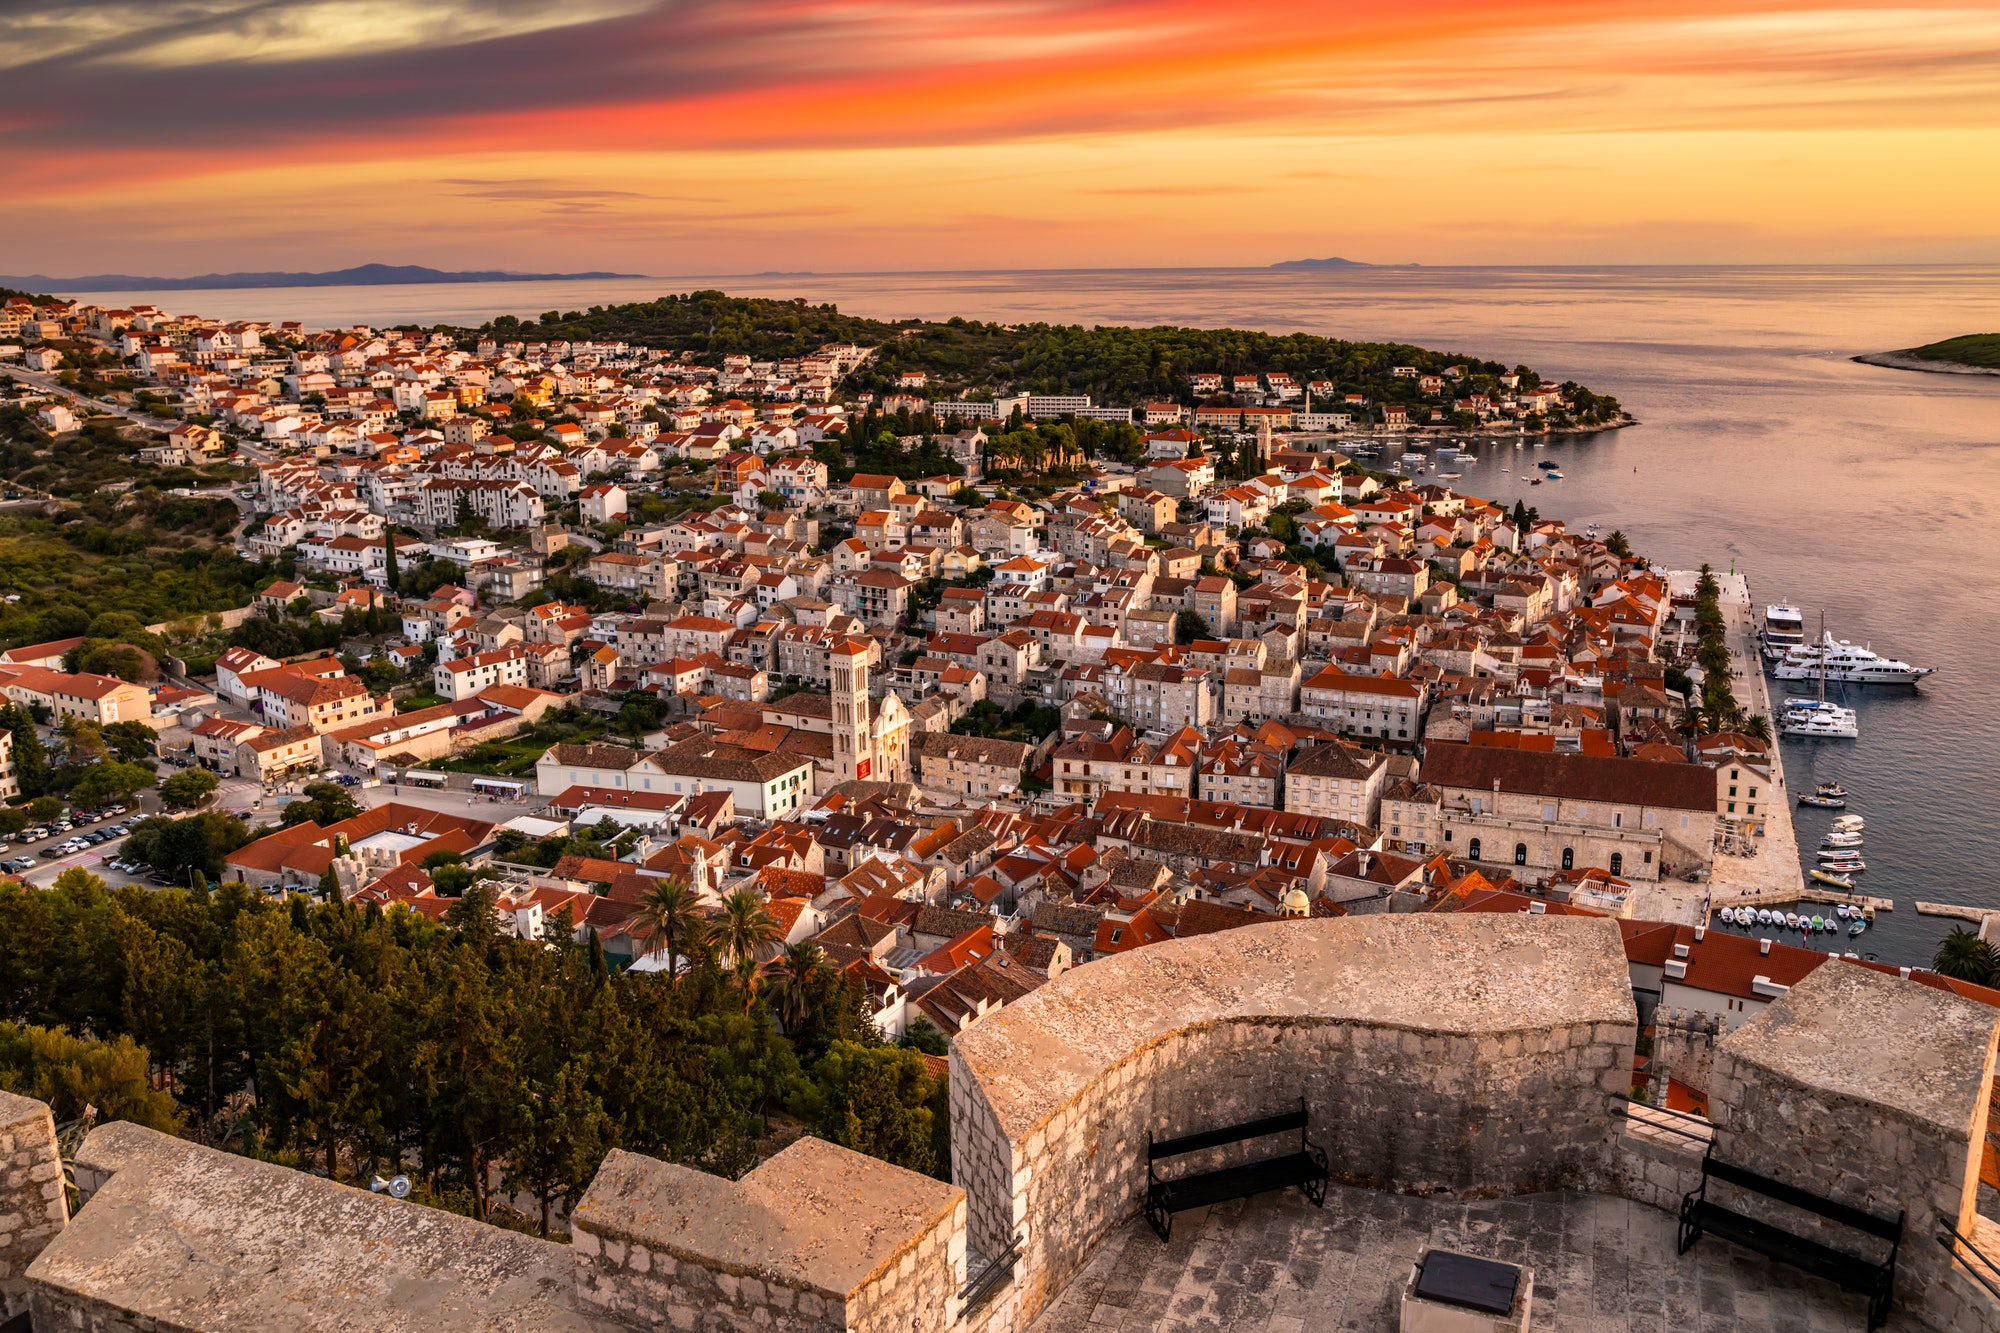 View of Hvar at sunset from the fortress. Hvar island, Croatia